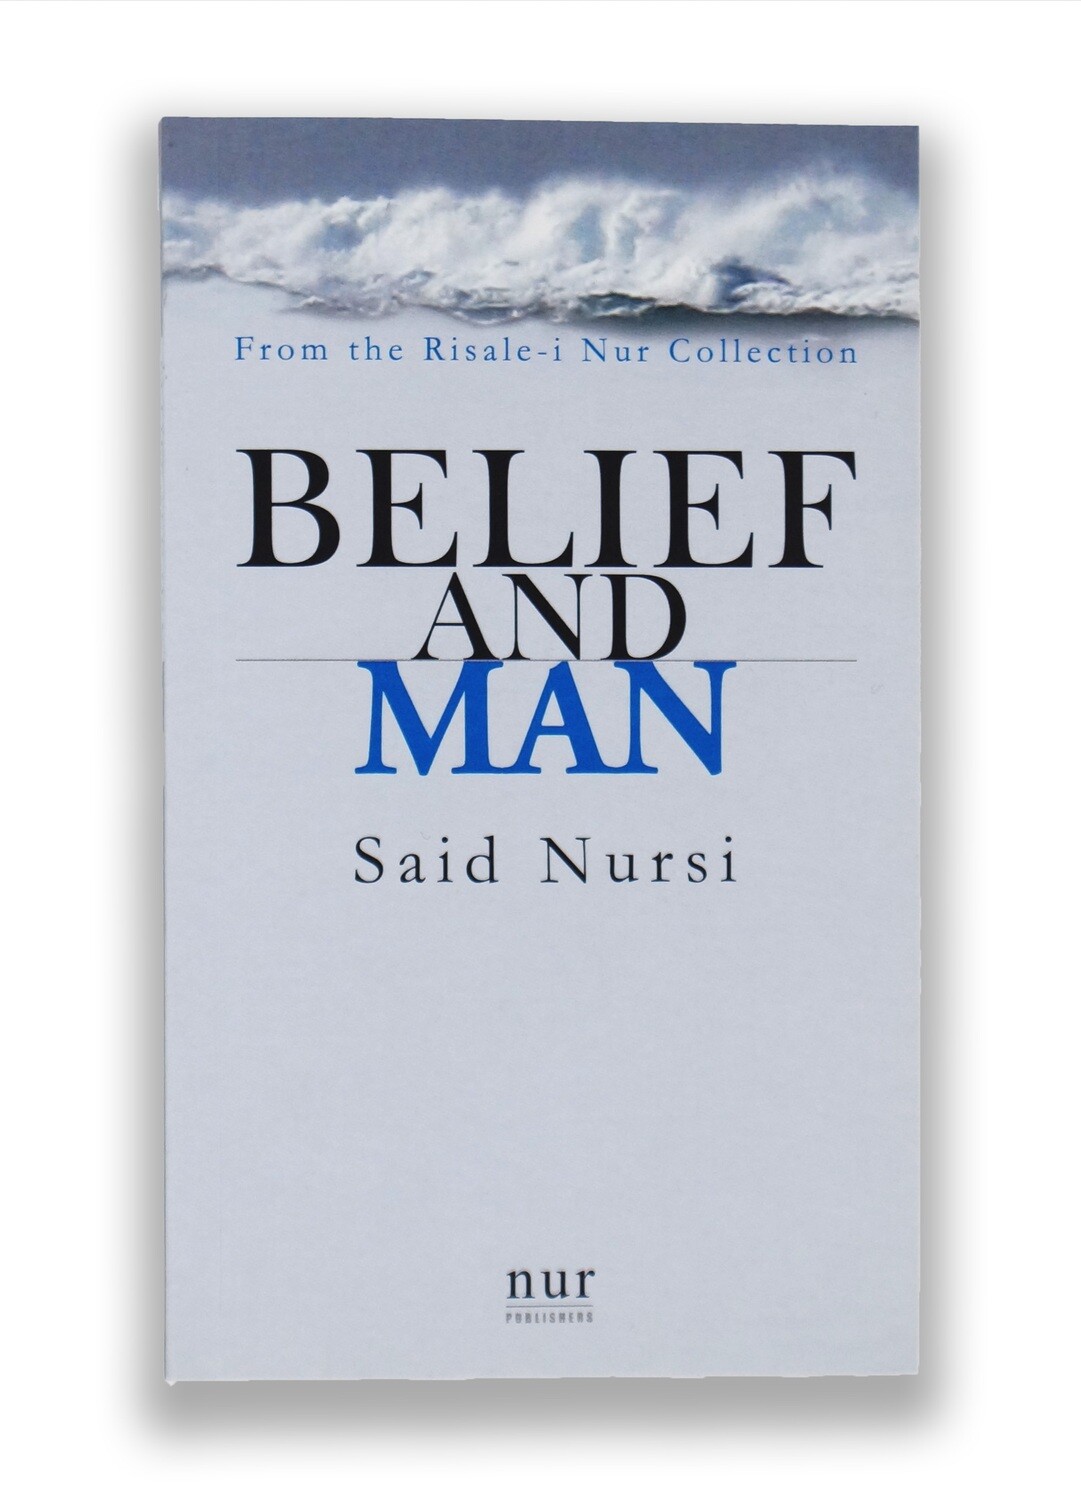 Belief and Man